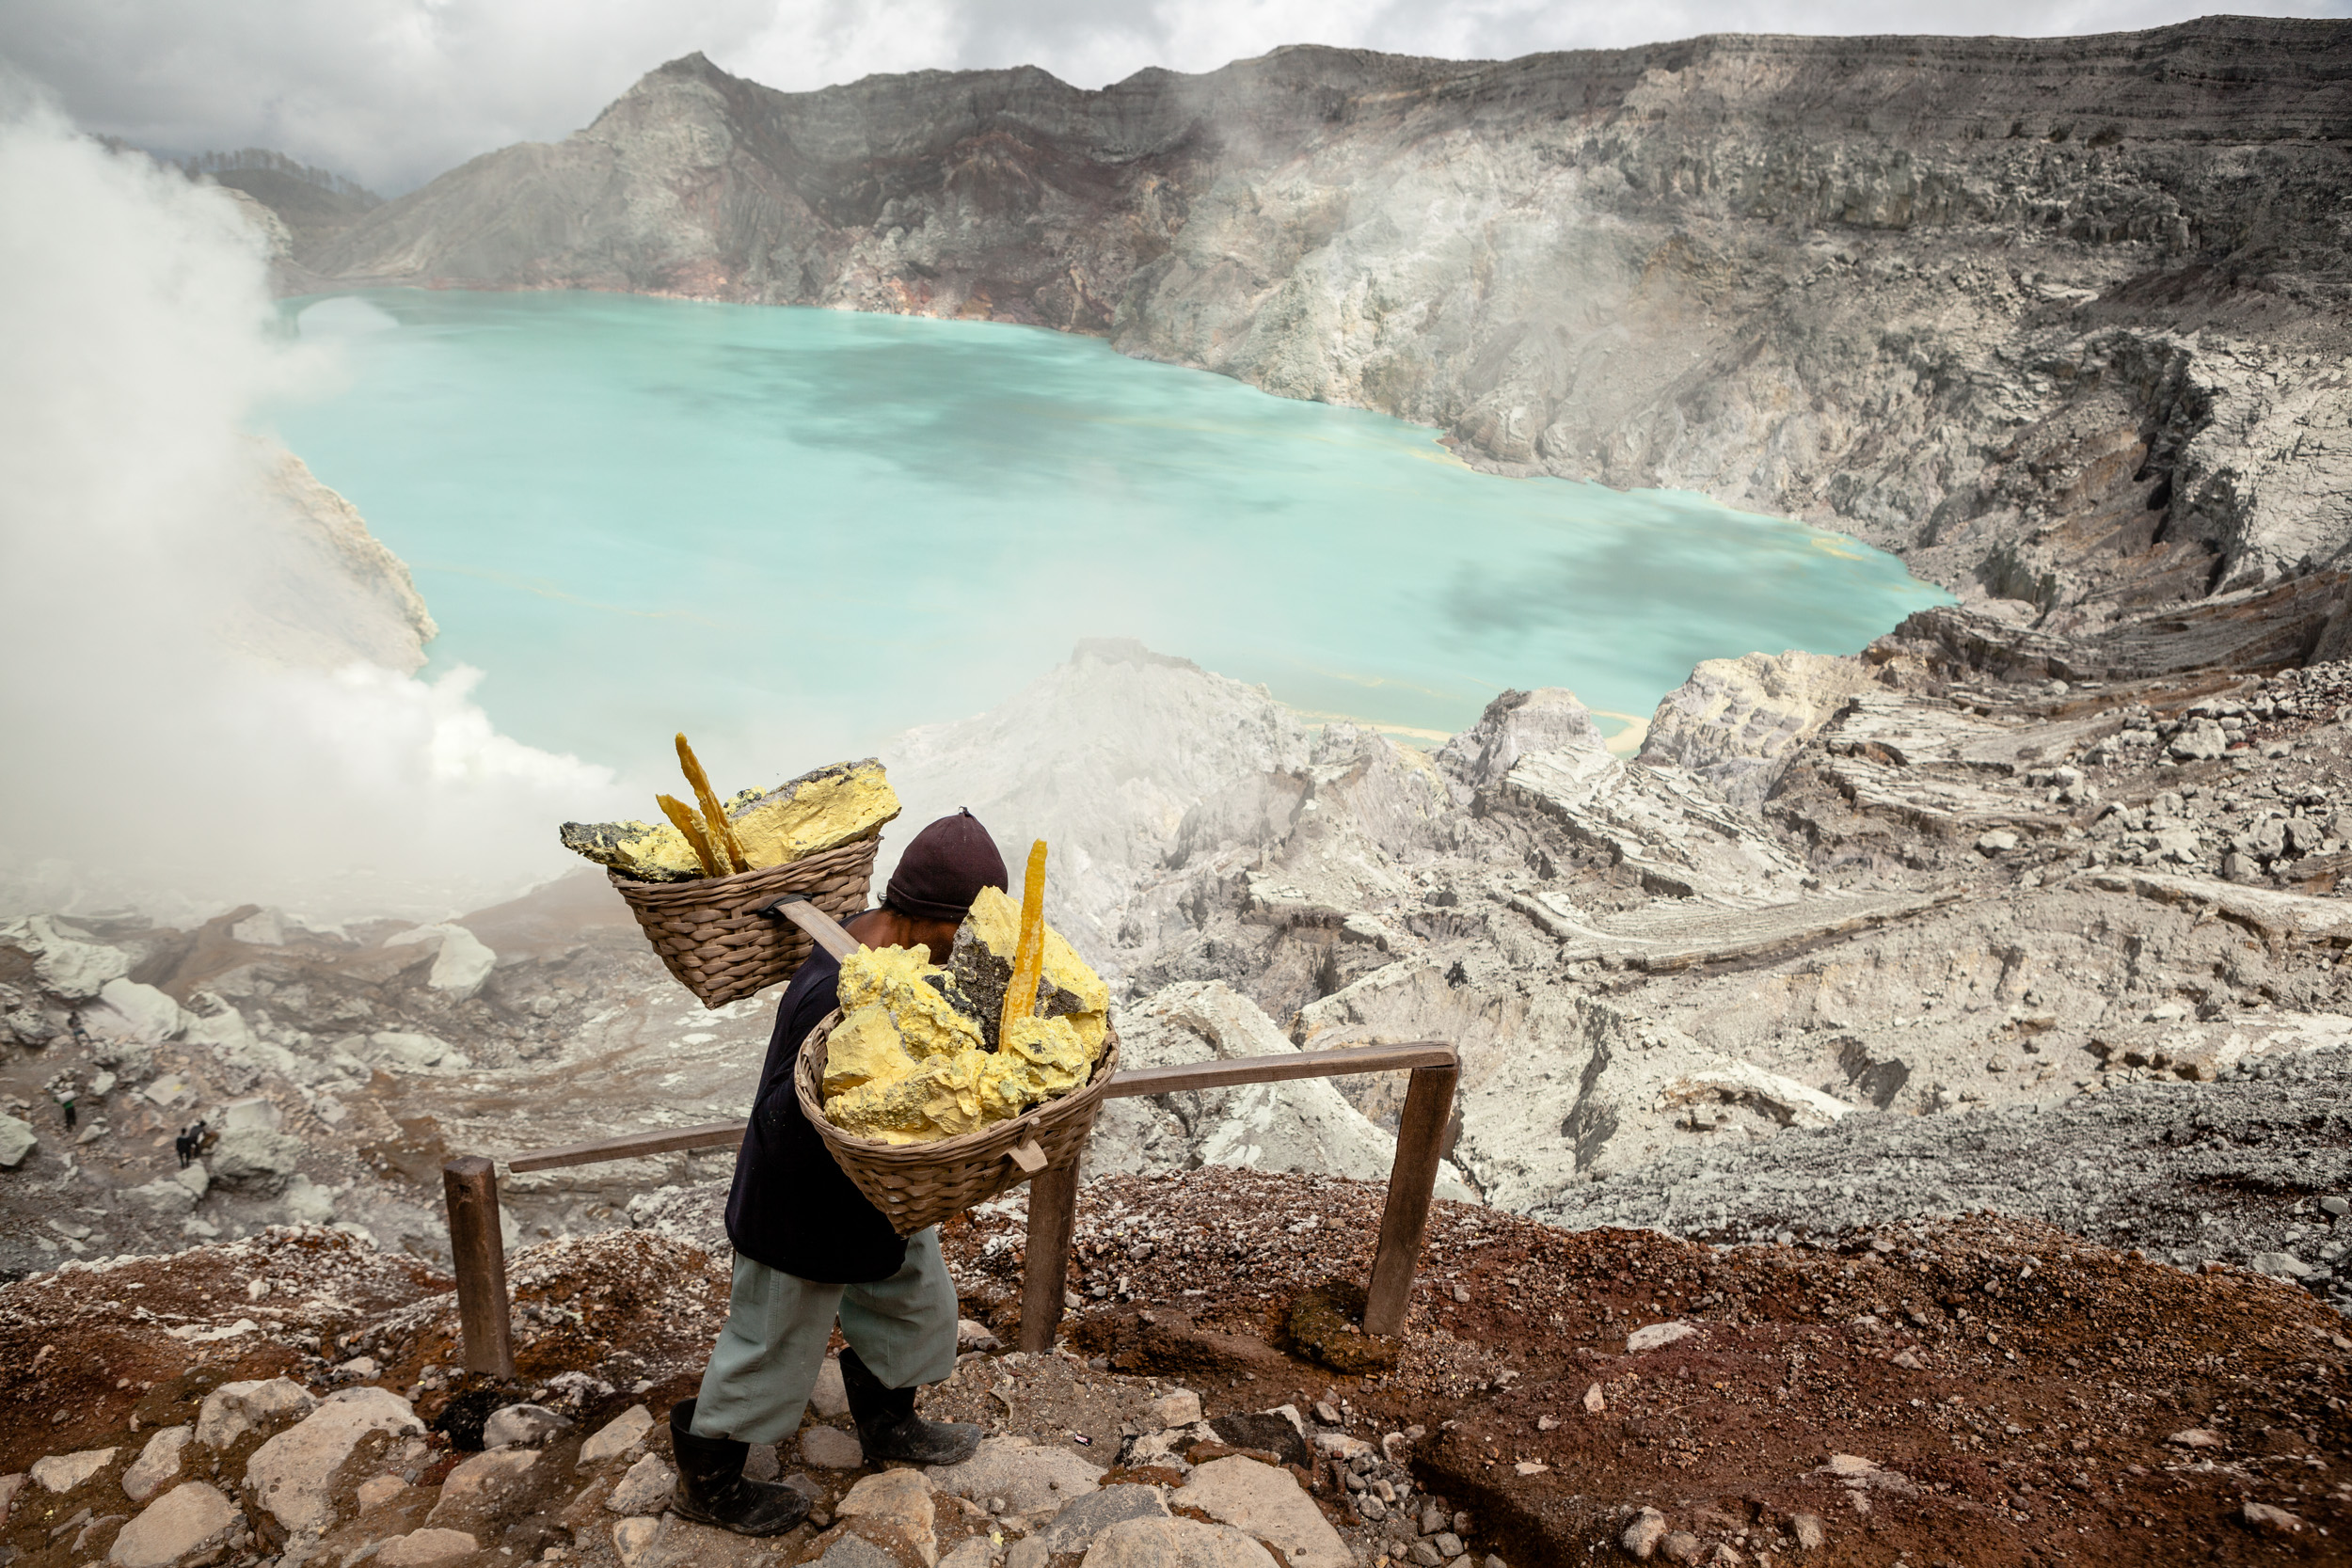 East Java, Indonesia. In the volcanic crater of Kawah Ijen, filled with a turquoise, extremely acid lake, miners carry inhuman loads of sulfur on their shoulders, from the bottom to the peak.